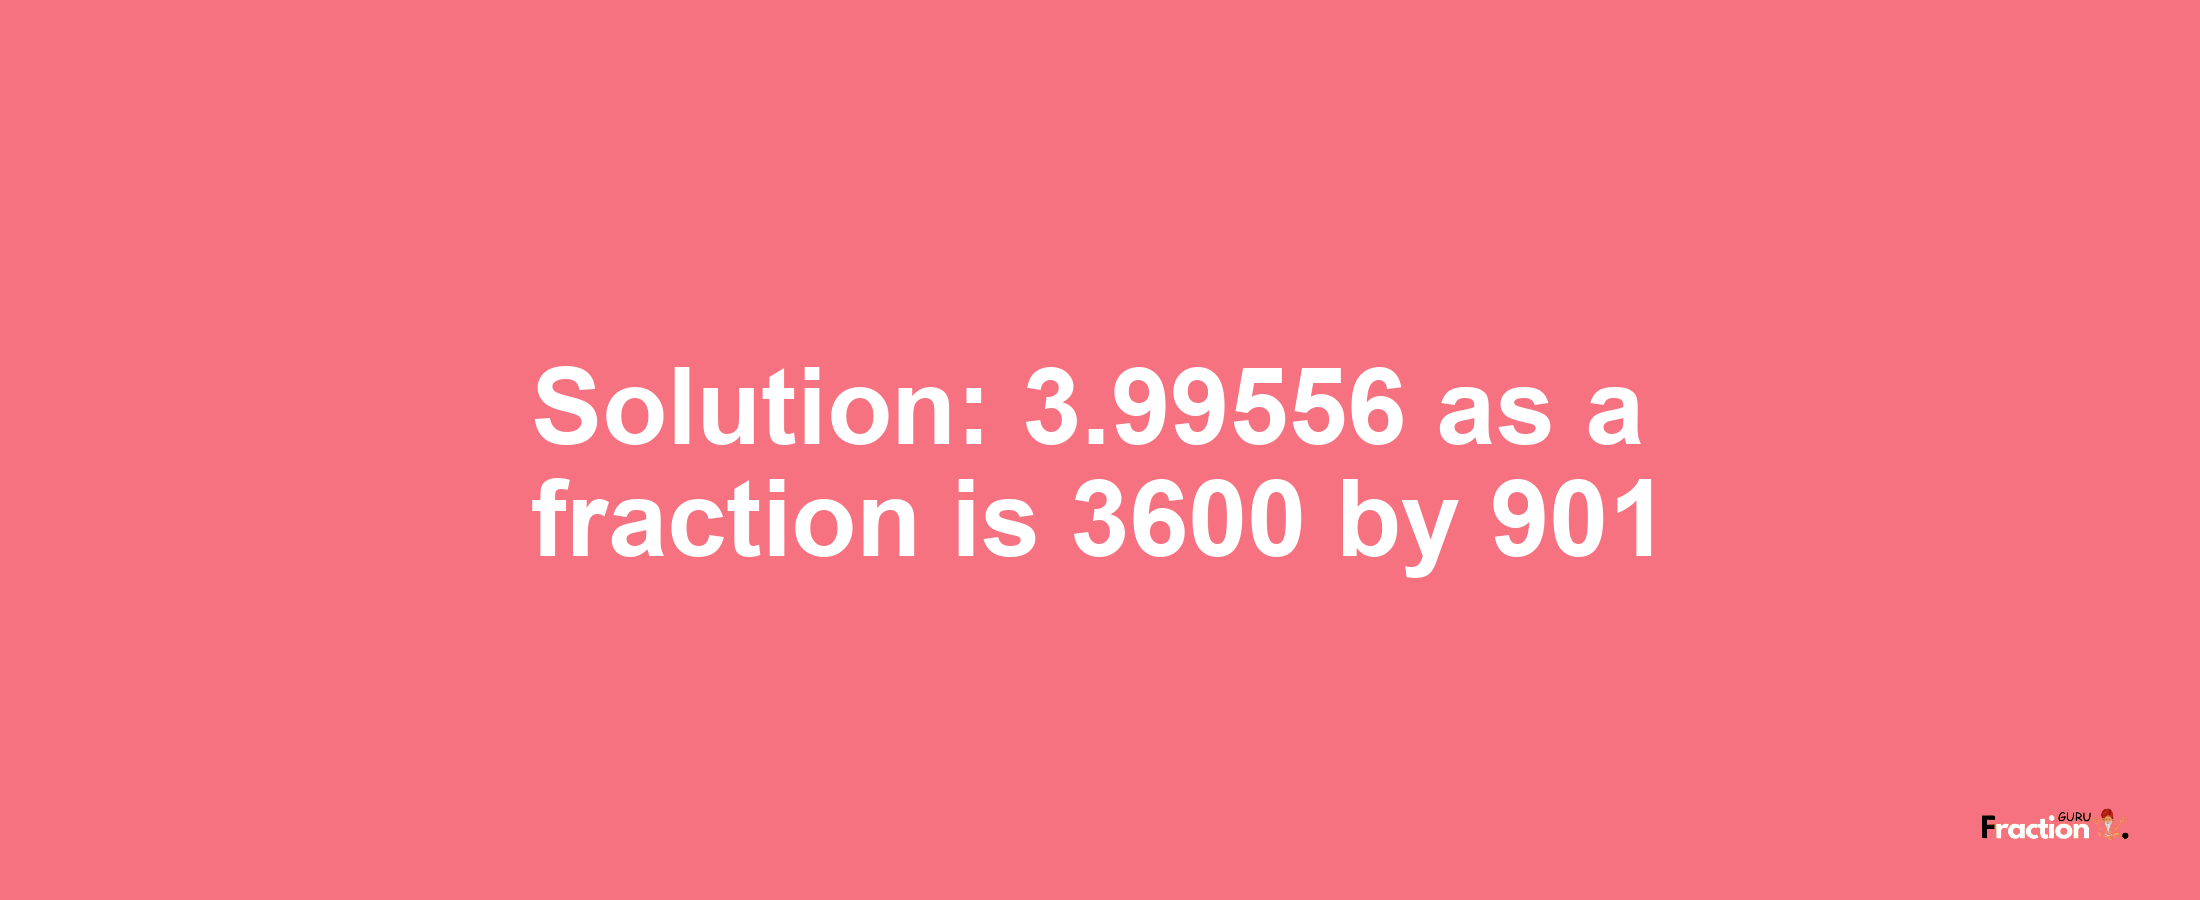 Solution:3.99556 as a fraction is 3600/901